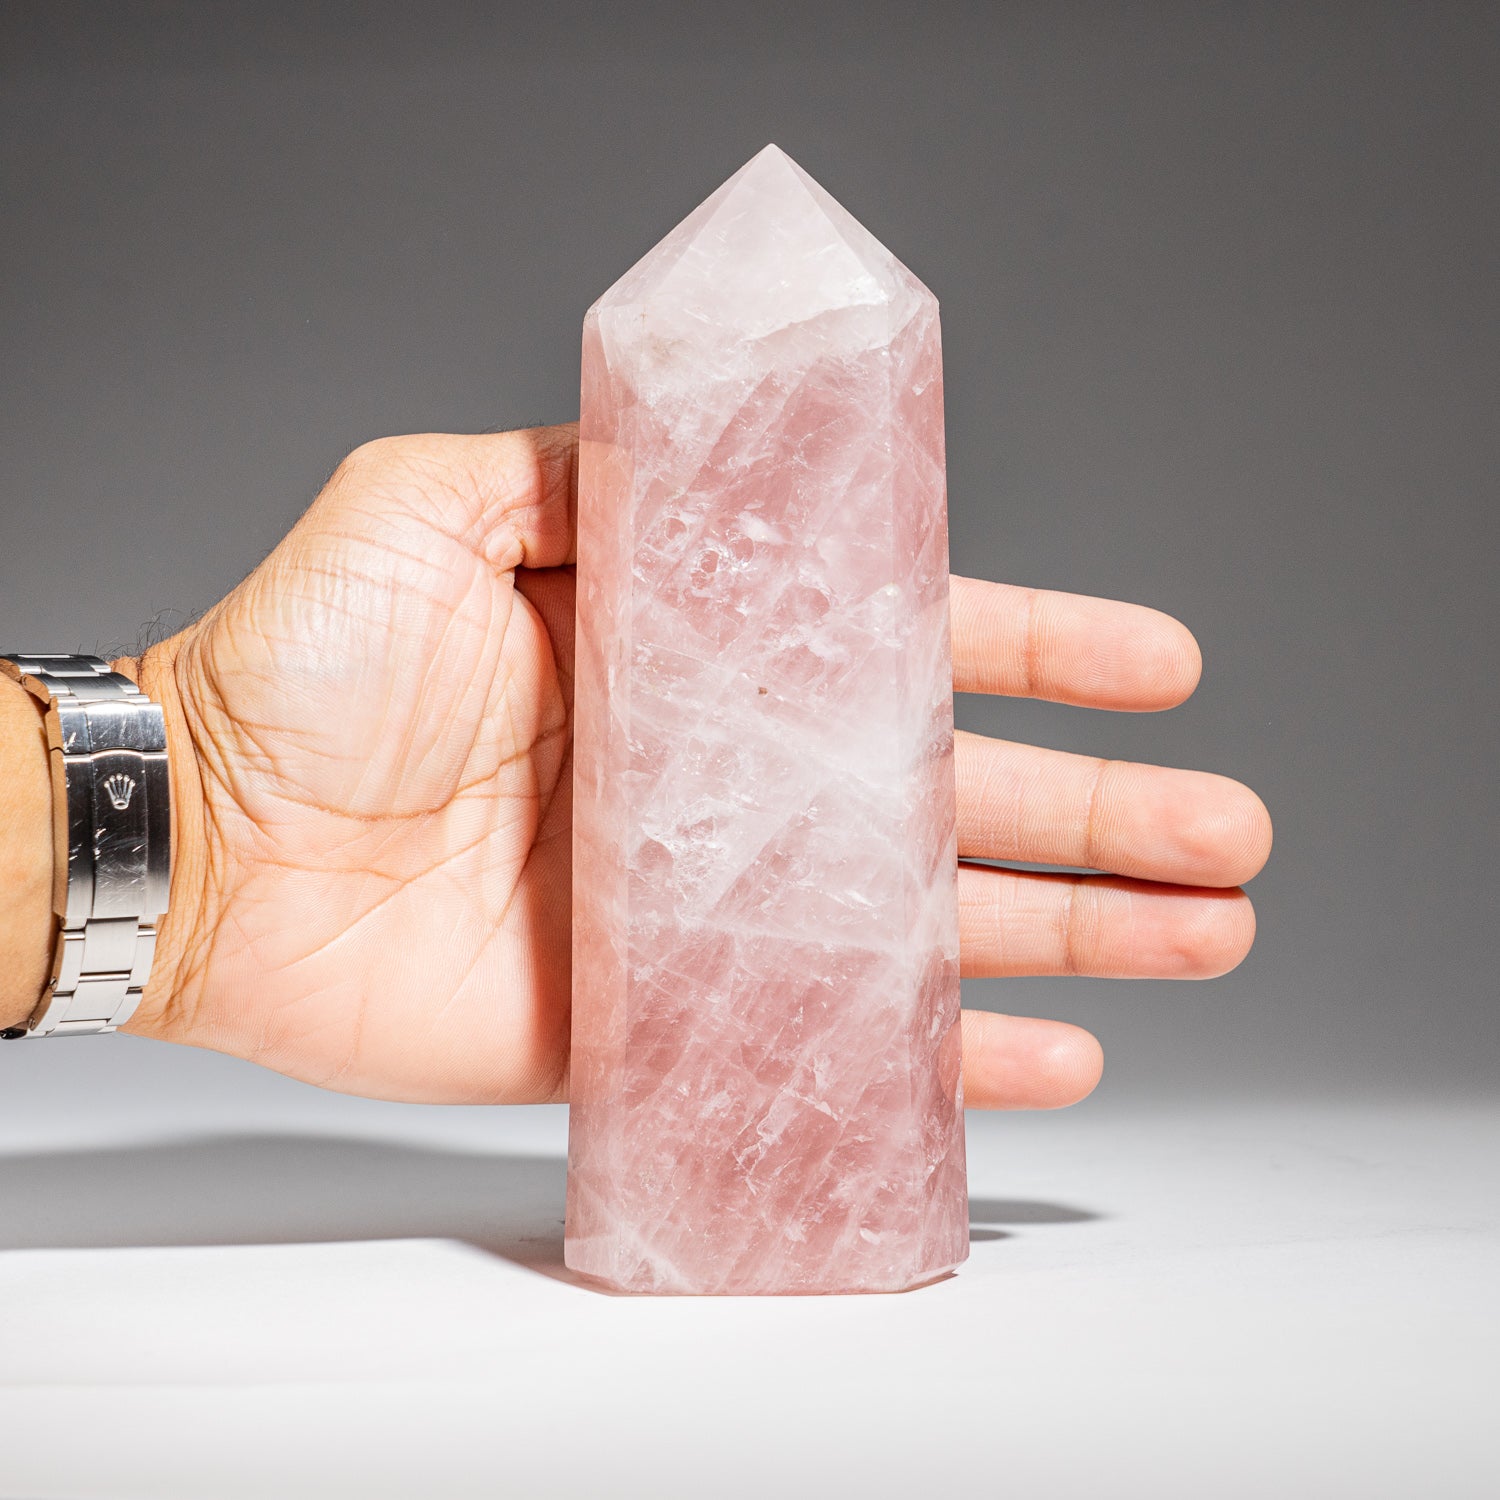 Genuine Rose Quartz Polished Point from Brazil (1.9 lbs)